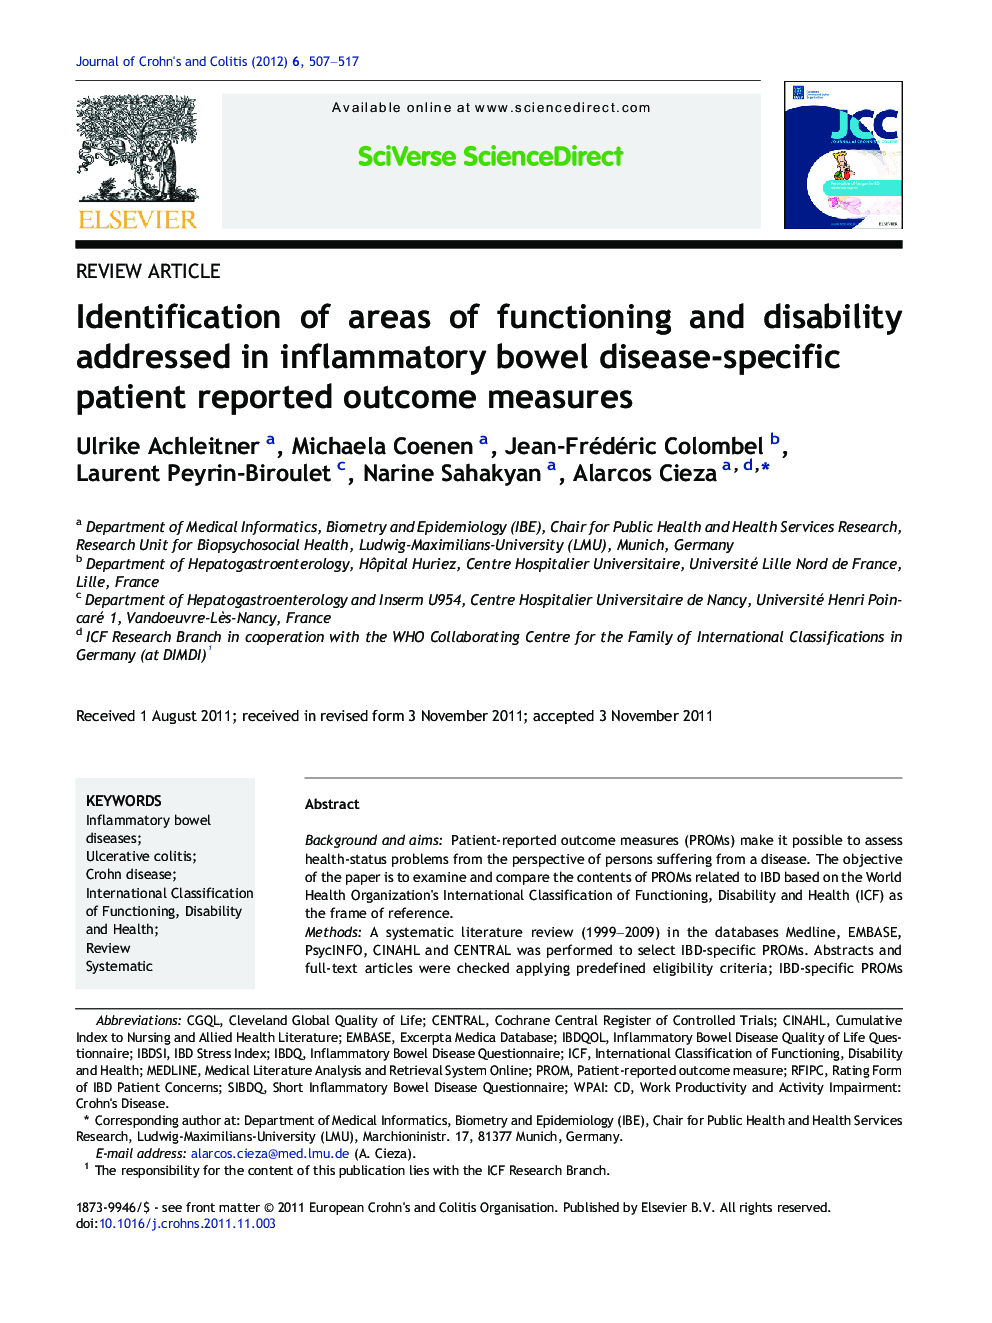 Review ArticleIdentification of areas of functioning and disability addressed in inflammatory bowel disease-specific patient reported outcome measures